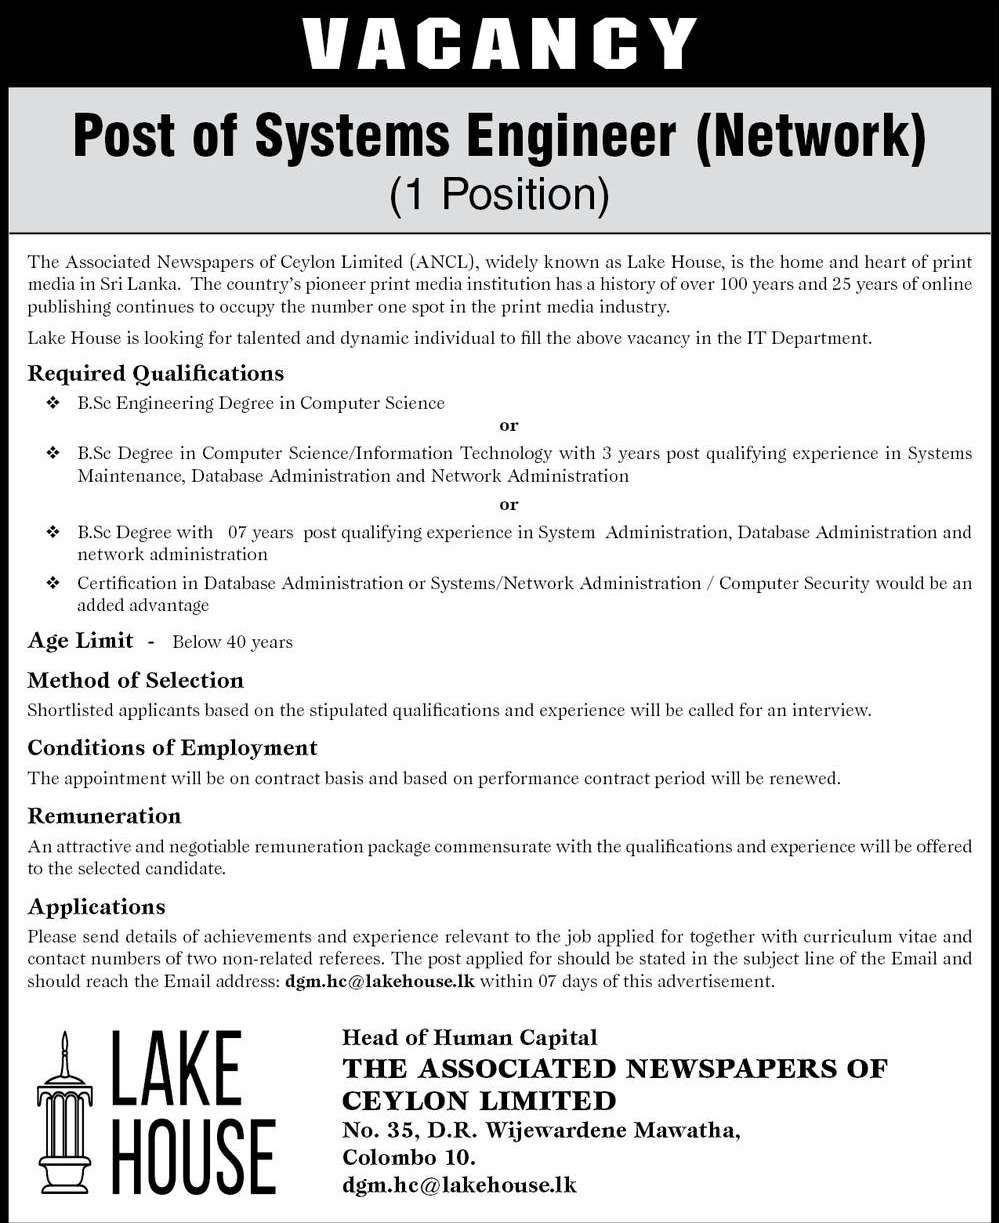 Post of Systems Engineer (Network)